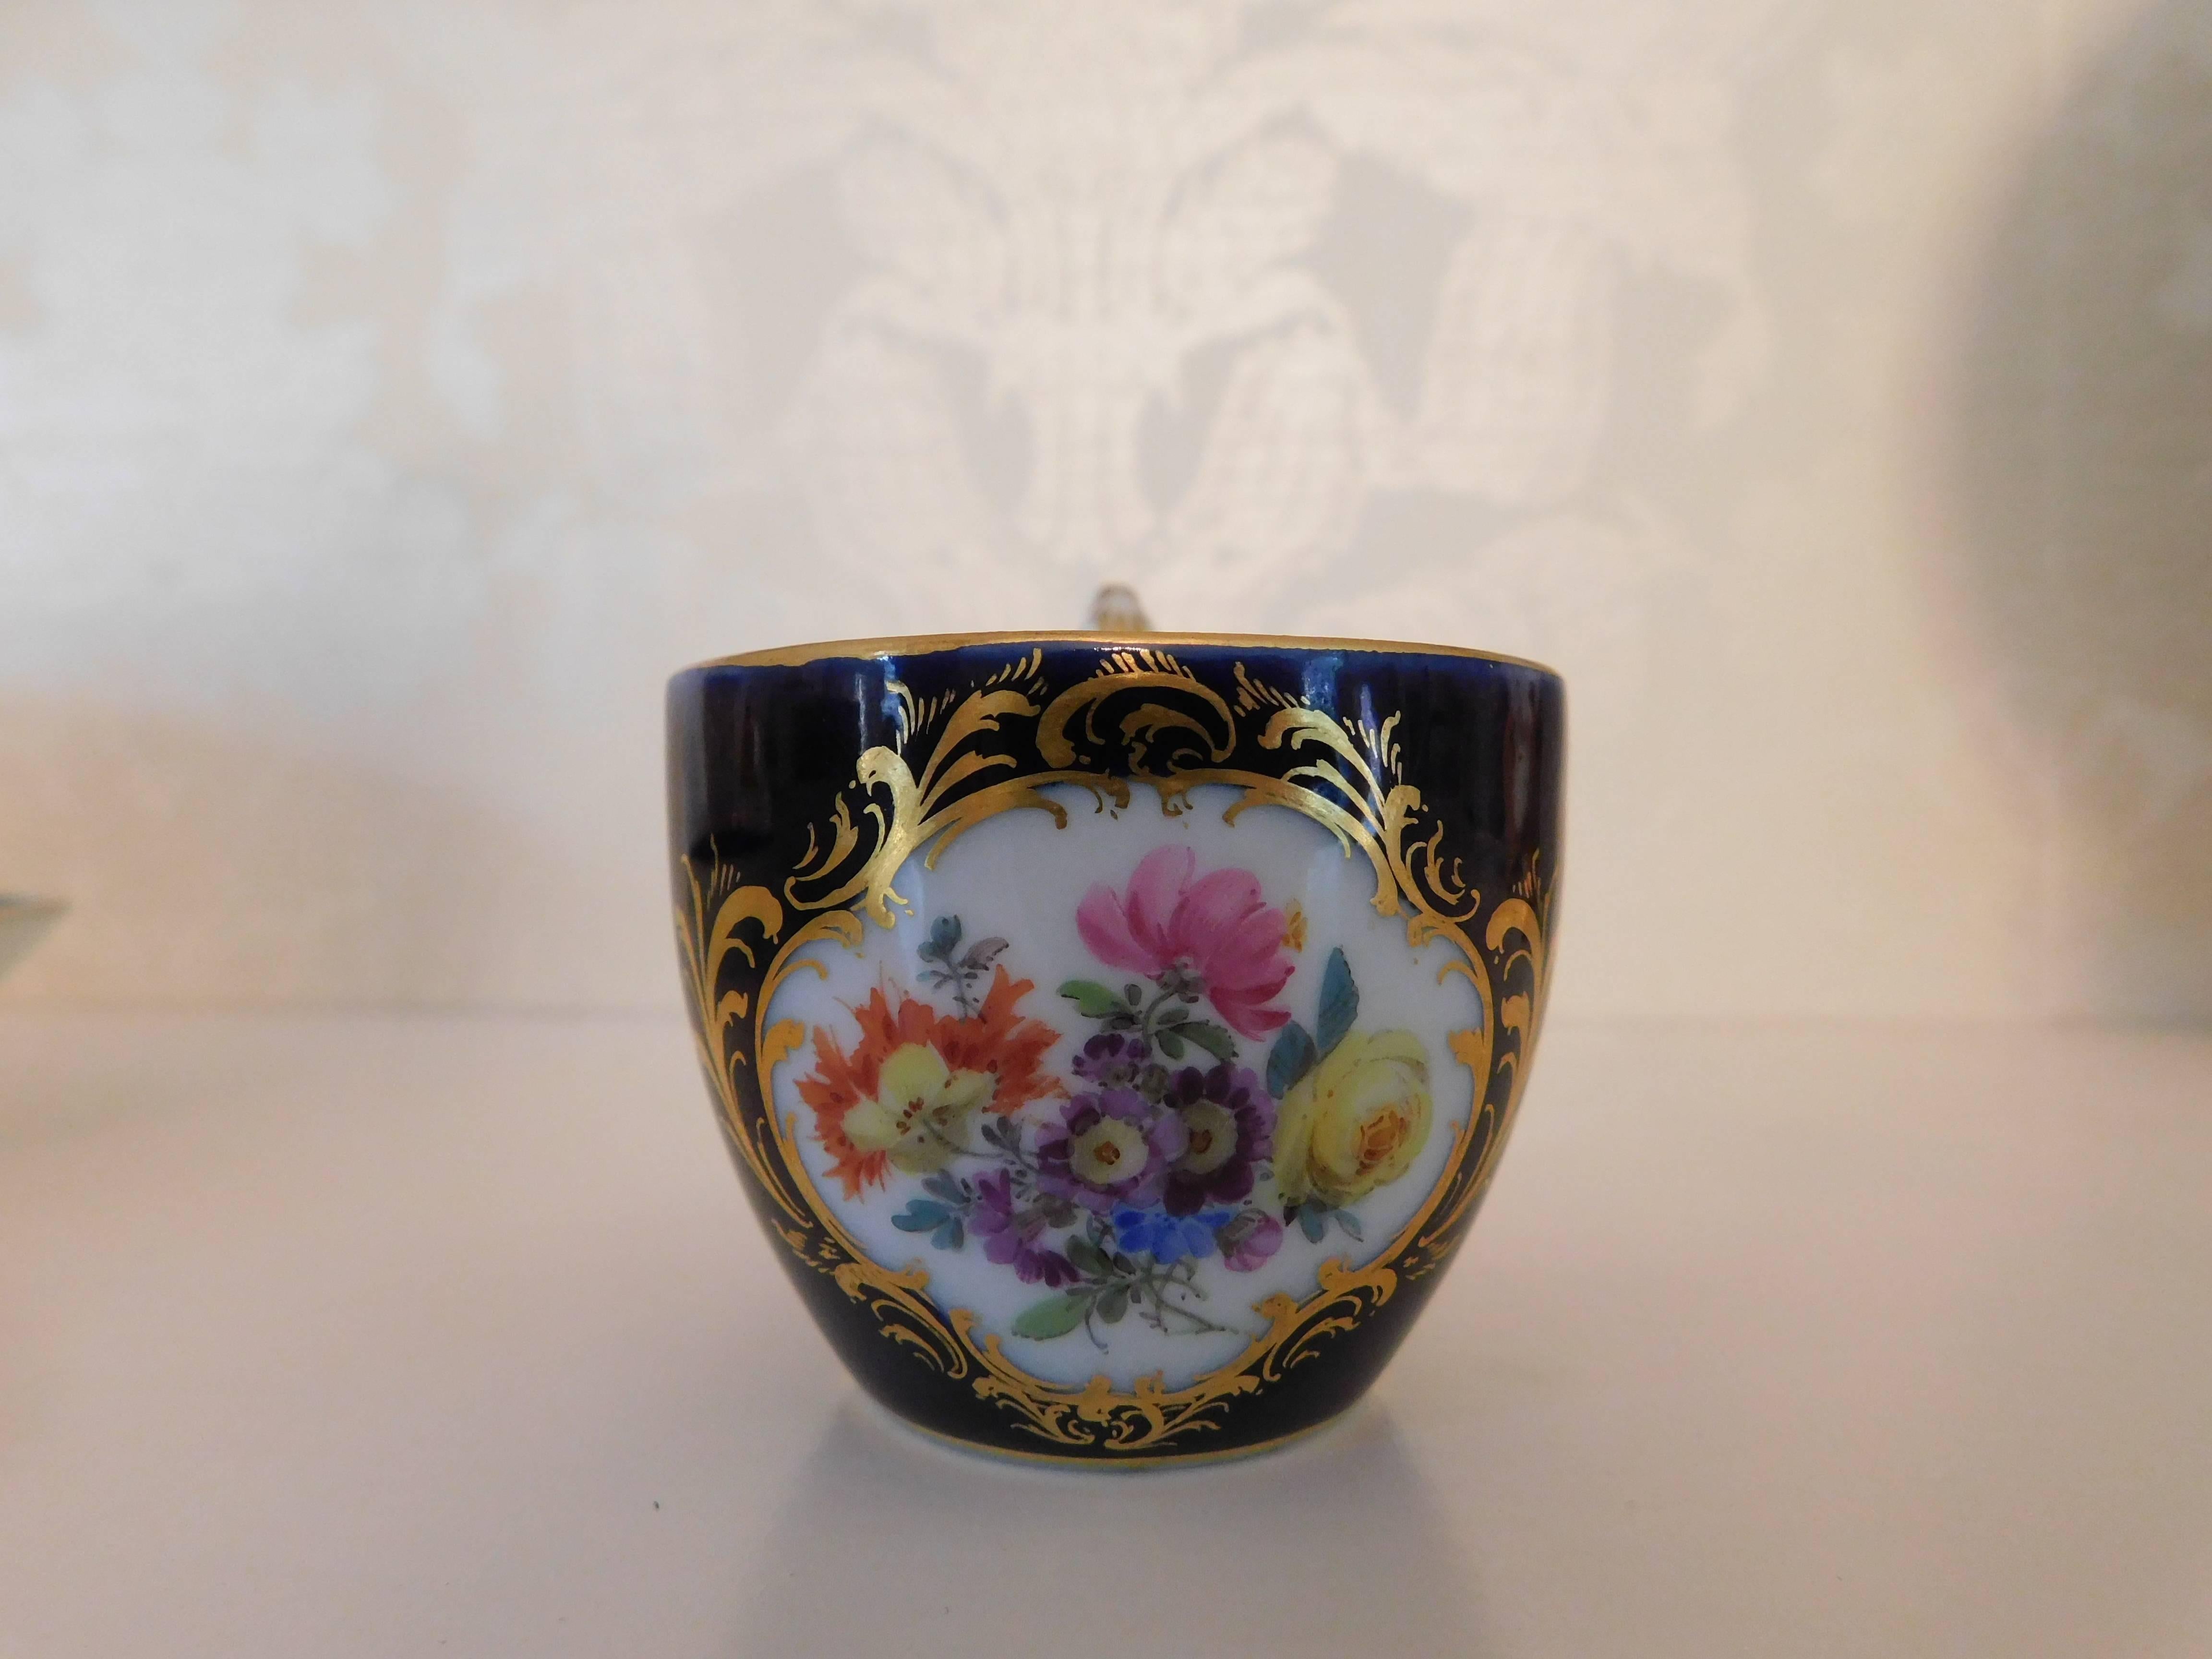 Meissen porcelain cobalt blue and floral cup and saucer.

Measurement in inches:
Cup 2 D x 1.75 H
Saucer 4.5 D x 1 H.